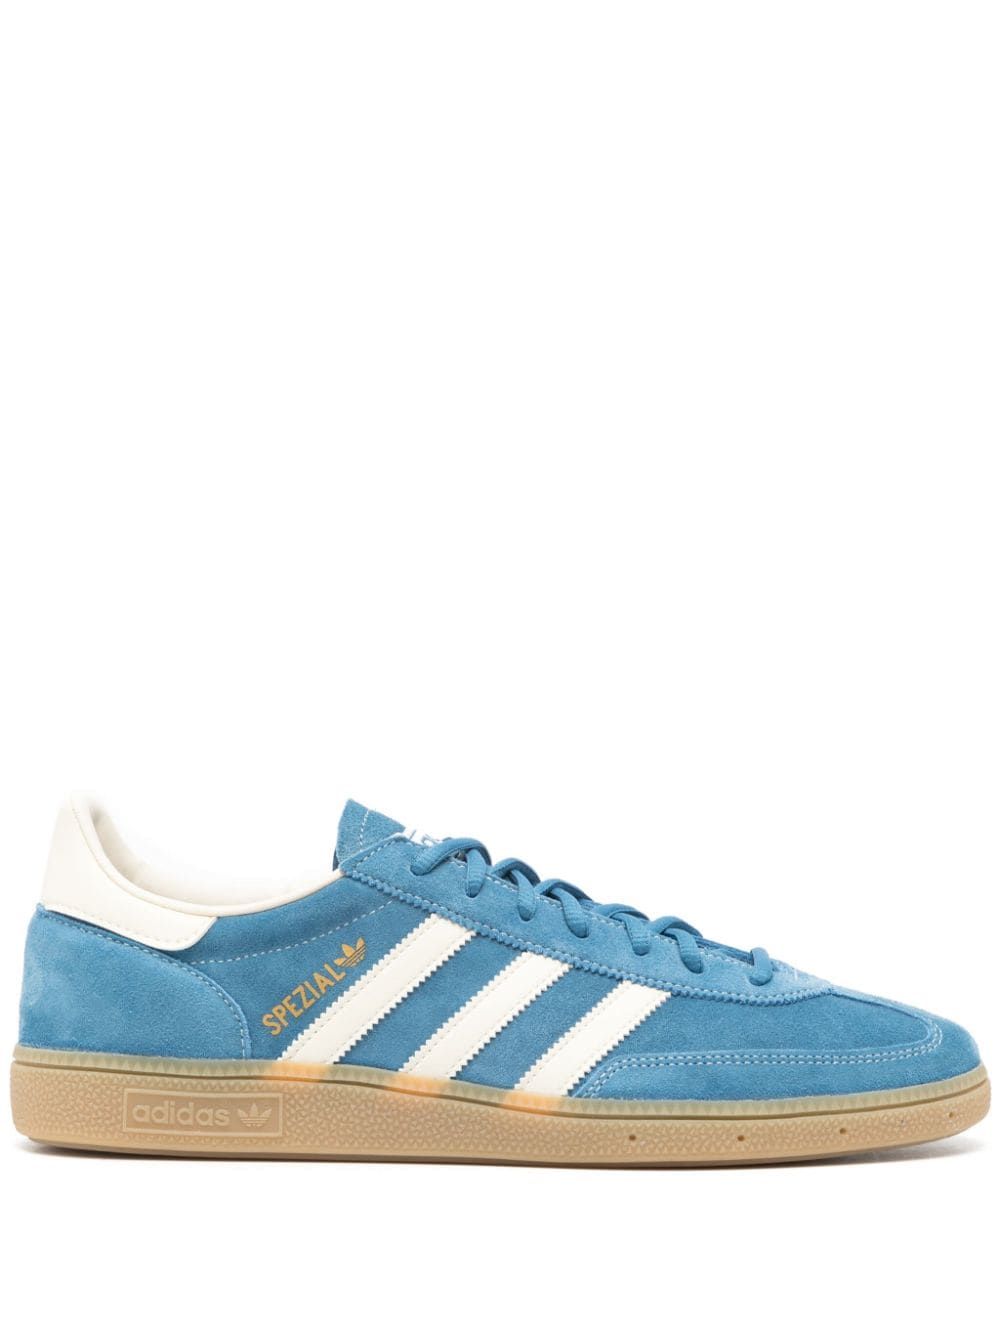 The DetailsadidasHandball suede sneakersImportedHighlightspacific blue/white calf suede panelled ... | Farfetch Global